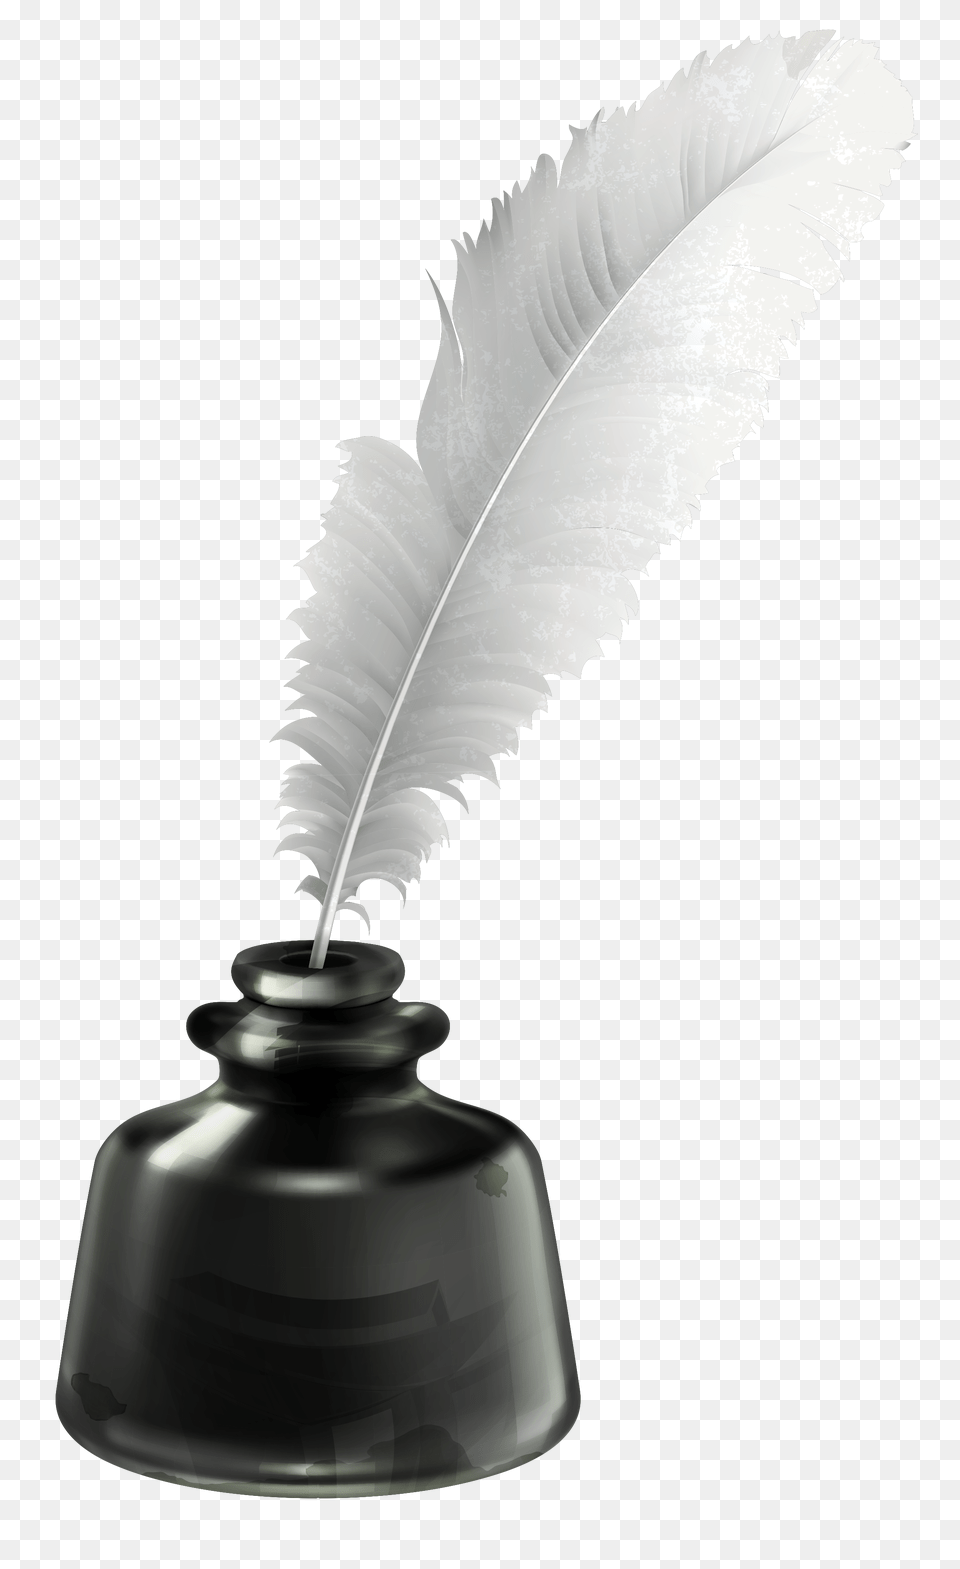 Quill And Blue Ink Pot Transparent Clip Art Office, Bottle, Ink Bottle, Smoke Pipe Png Image